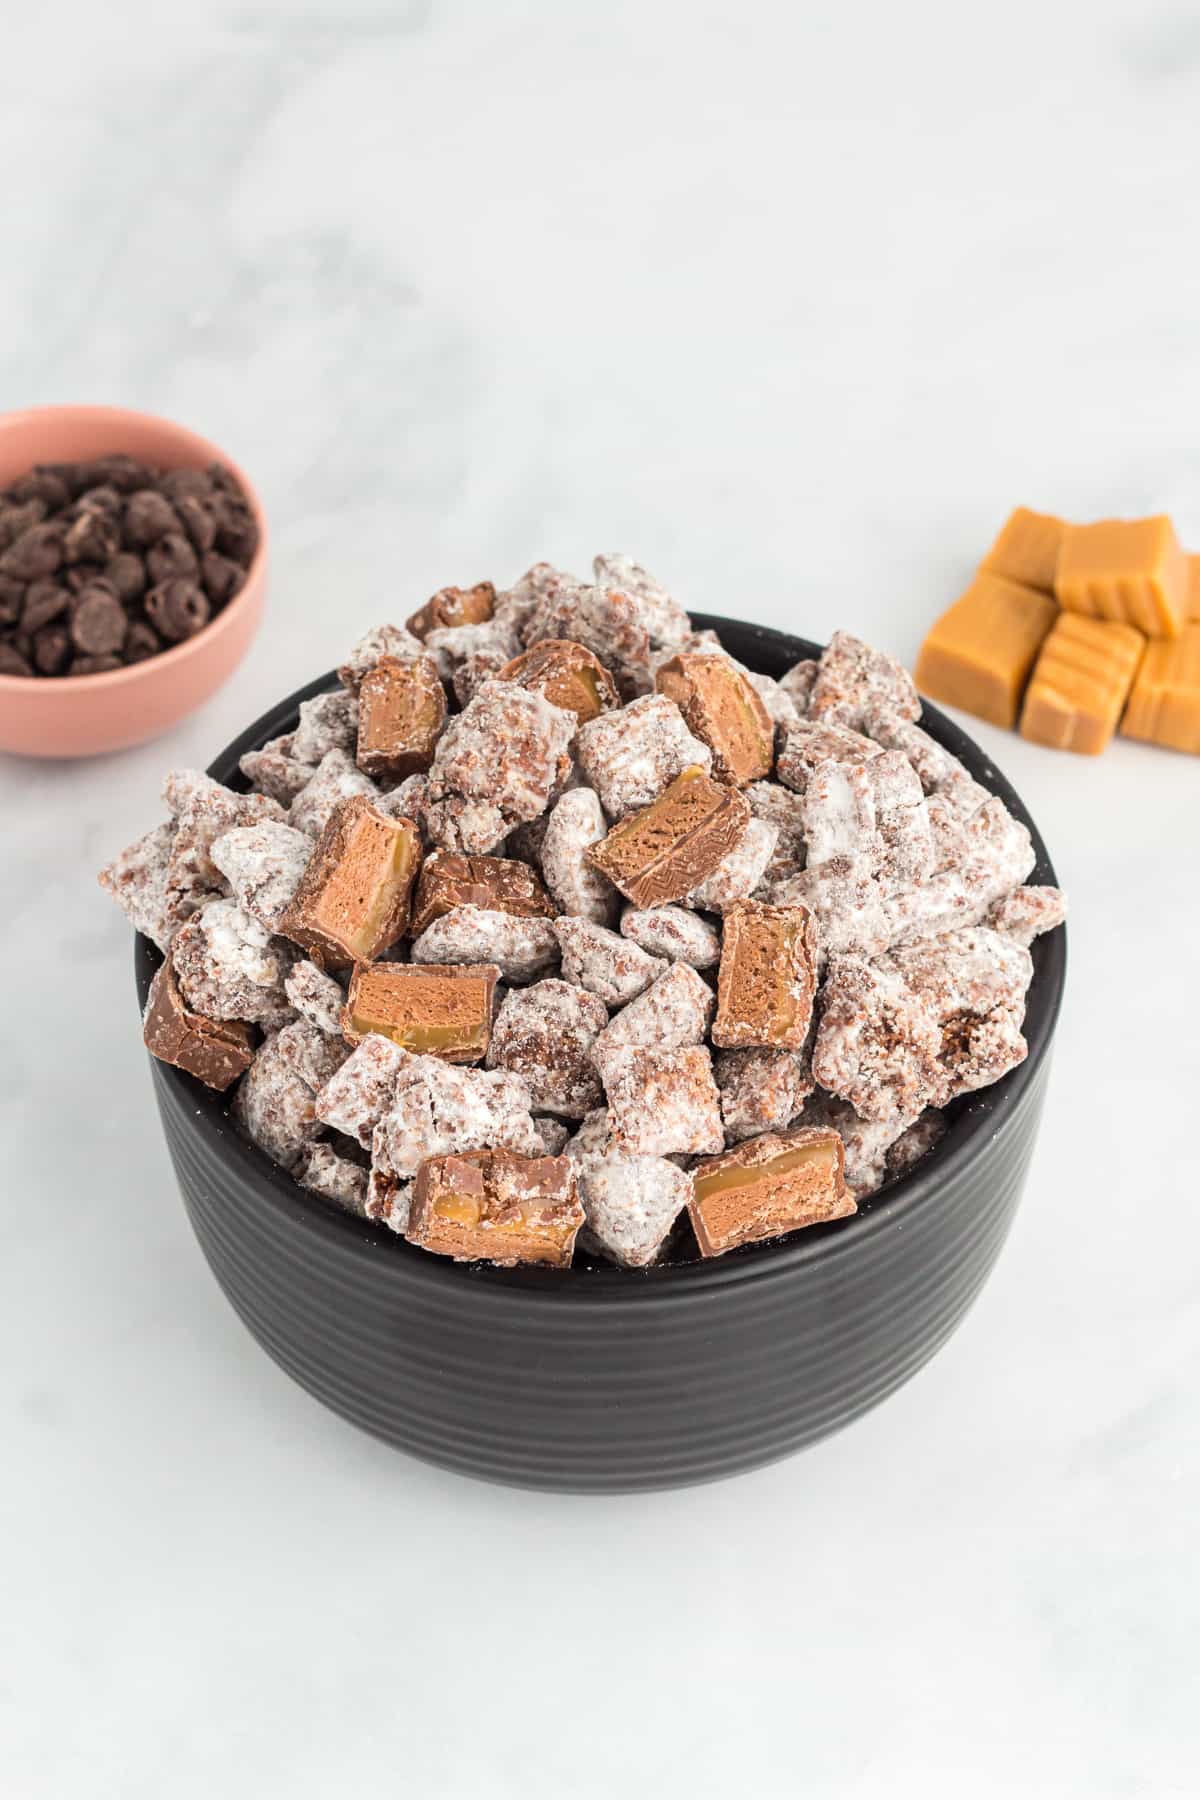 a bowl of puppy chow with chocolate caramel candies